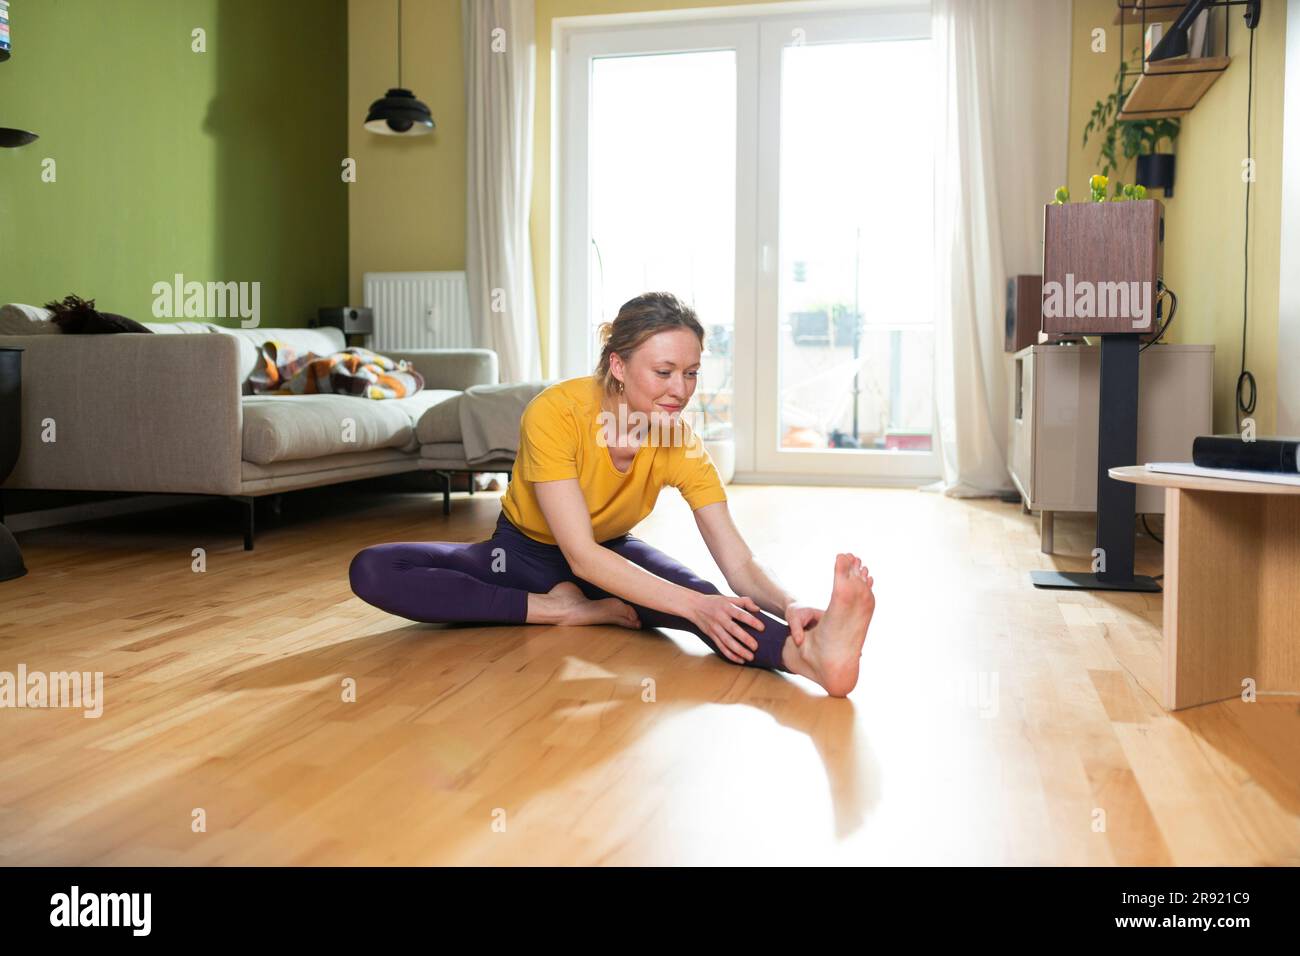 Smiling woman in yellow T-shirt and purple leggings exercising at home Stock Photo